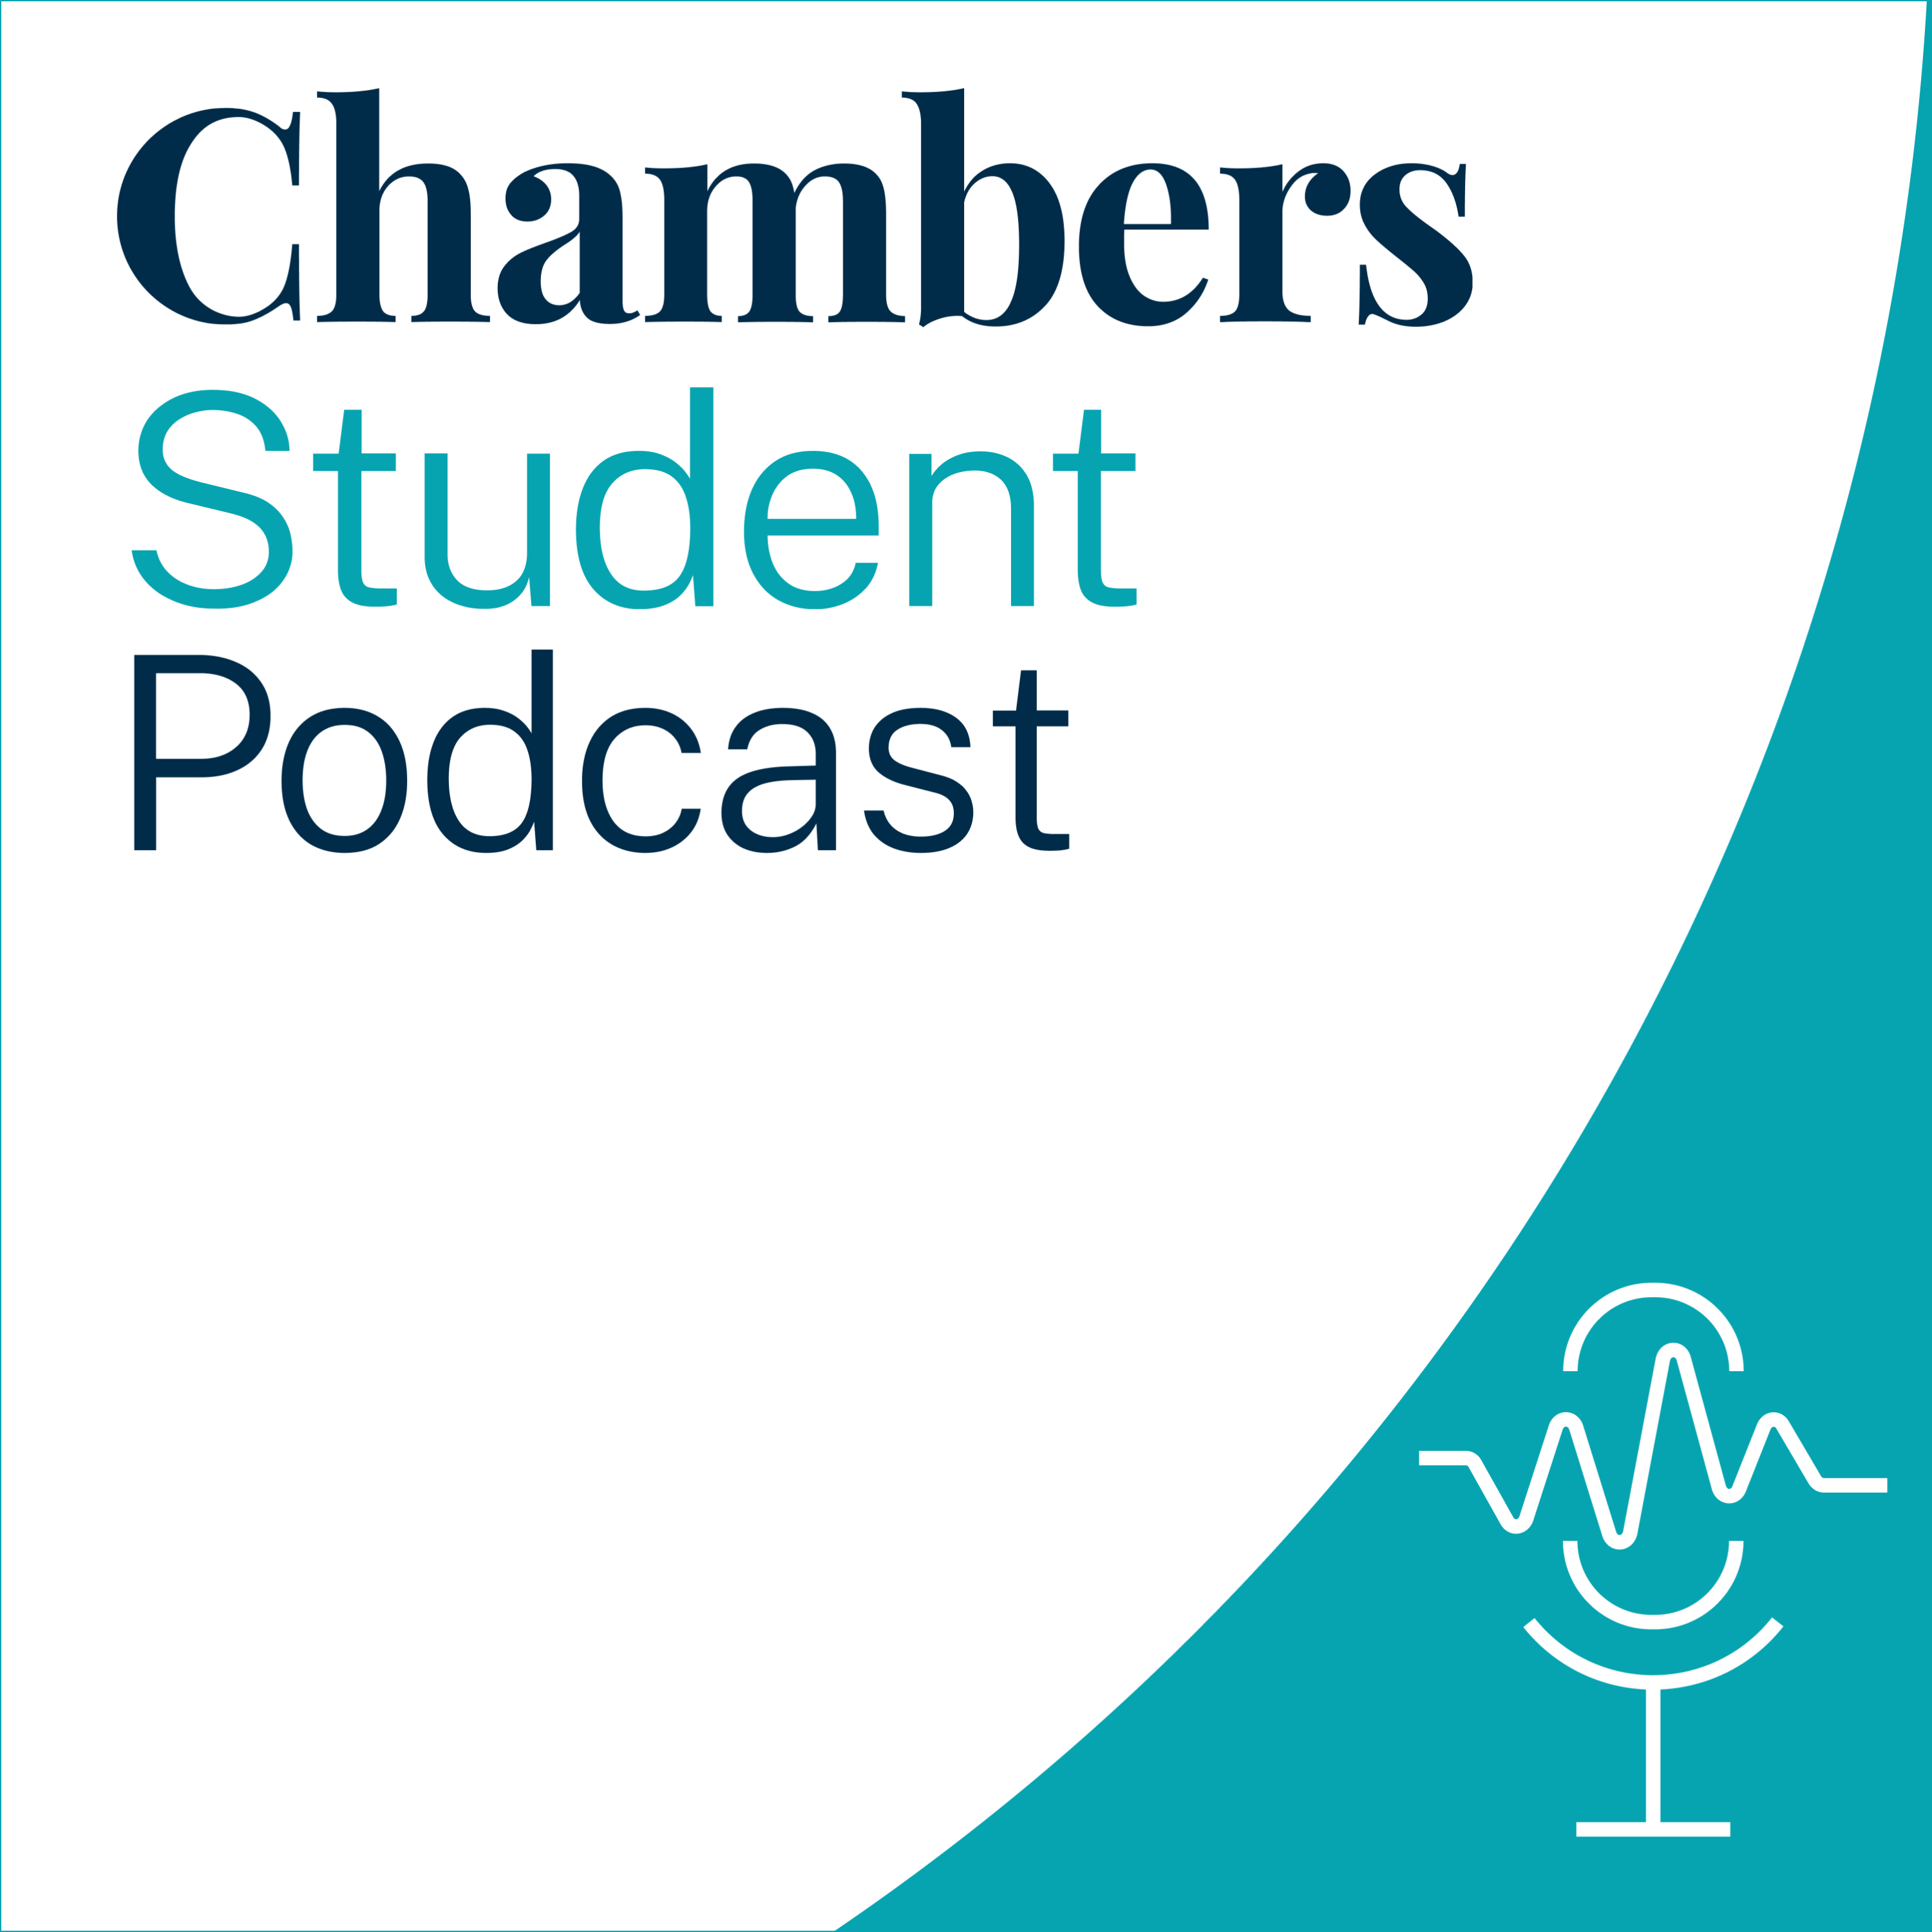 Chambers Student Podcast